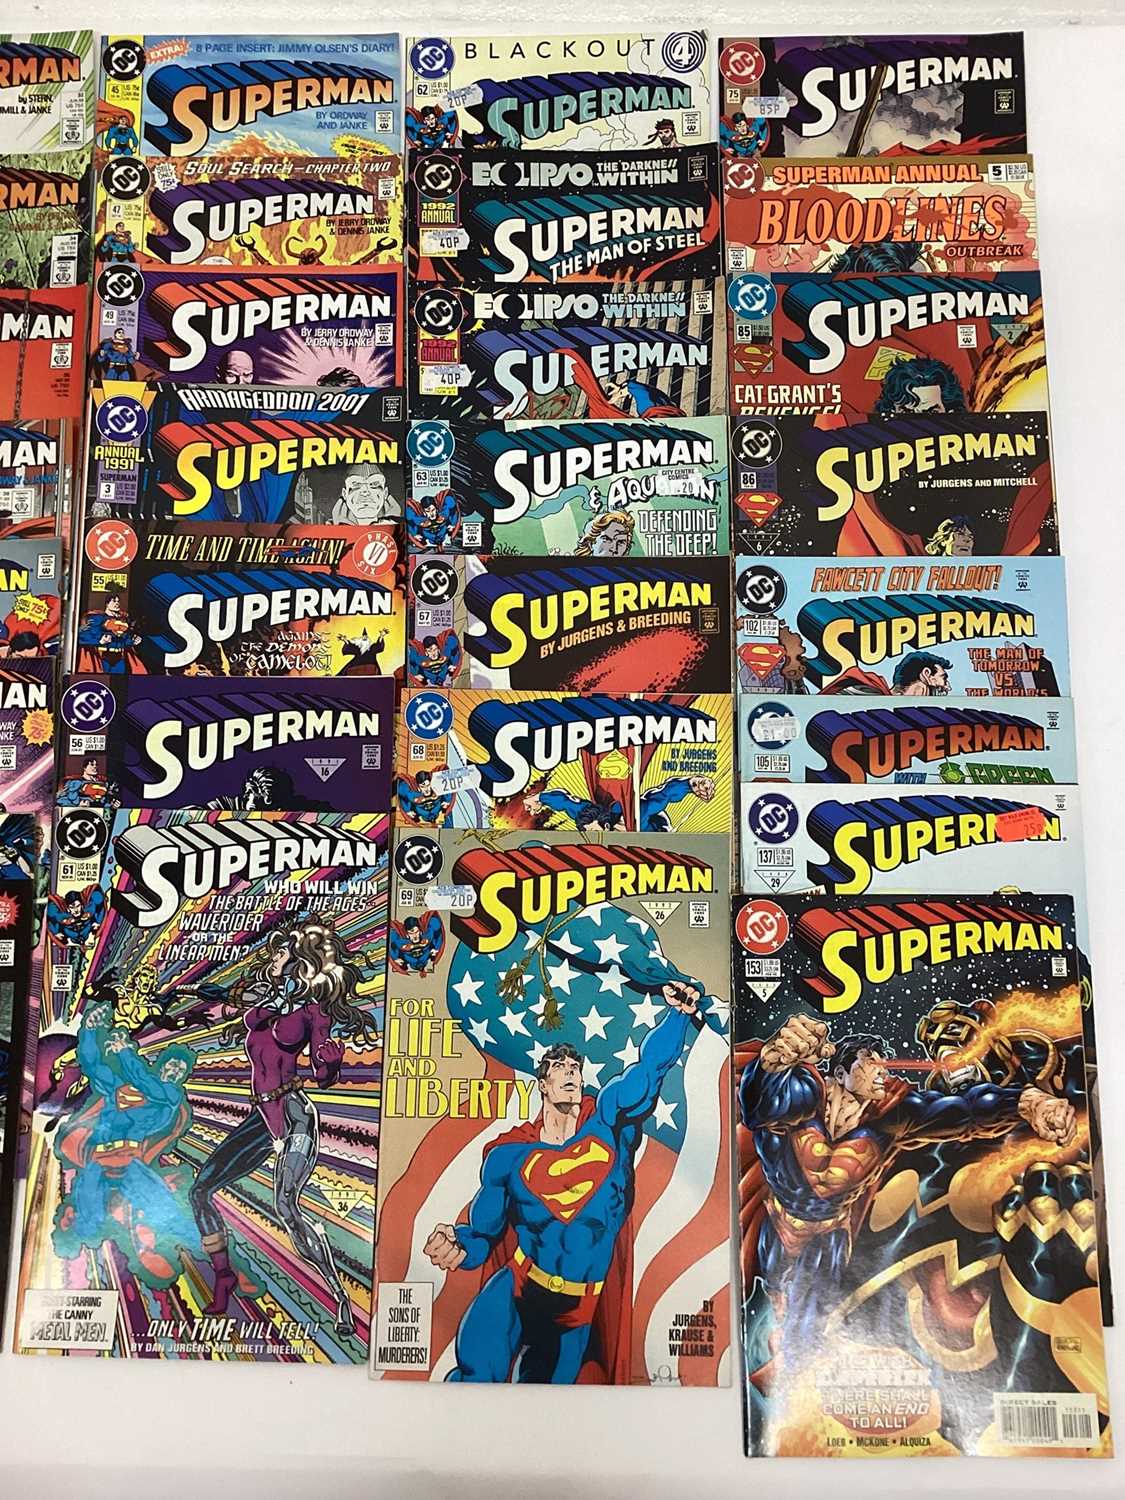 Large quantity of 1980's and 90's DC Comics, Superman to include #1, #4 1st appearance of Bloodsport - Image 3 of 11